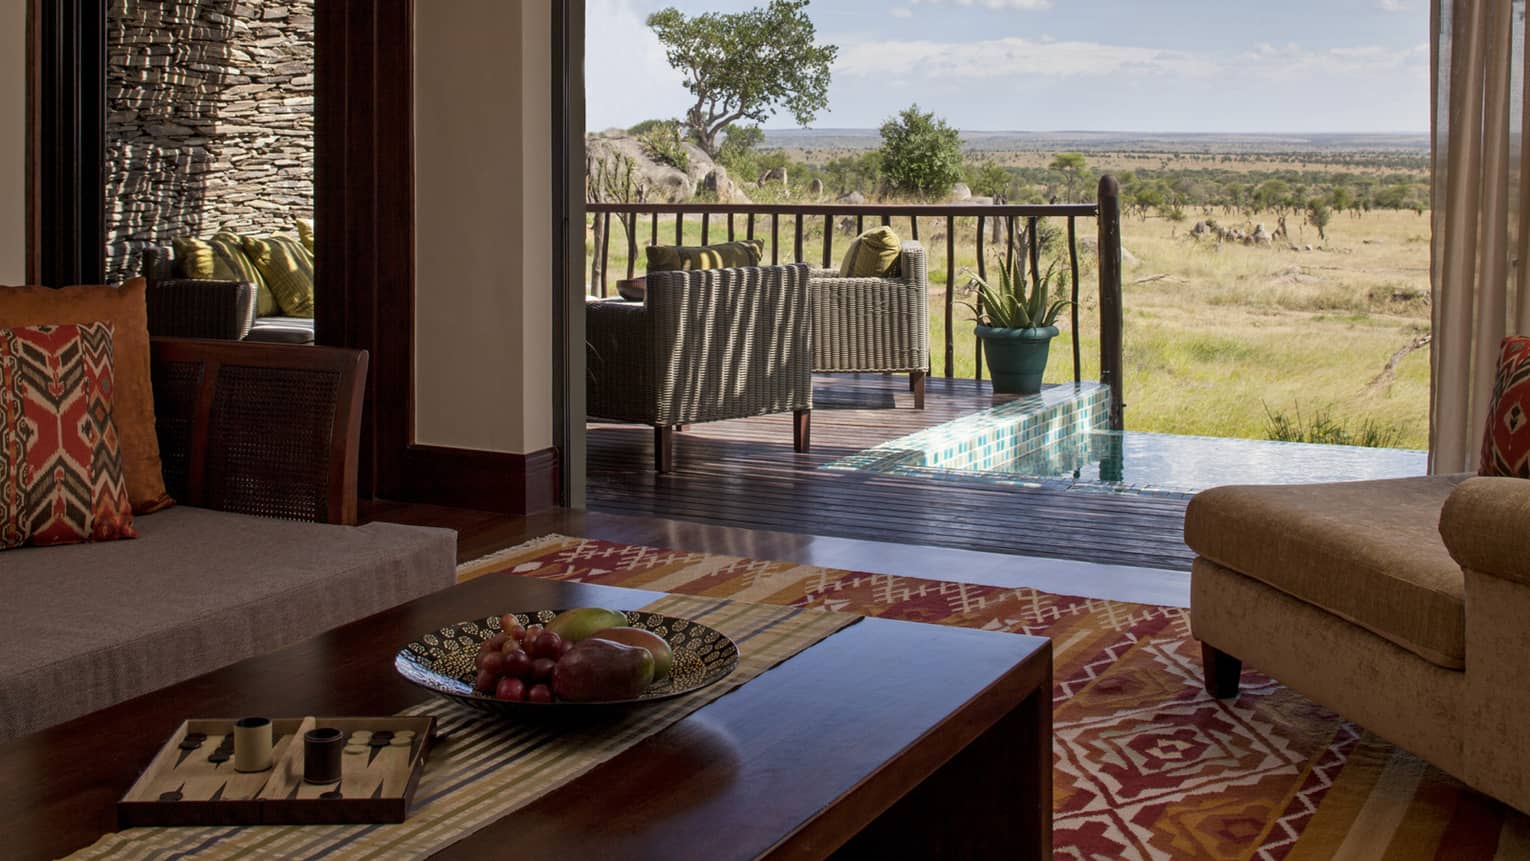 A suite decorated with earth toned couches and a rug look out onto an out at the watering hole